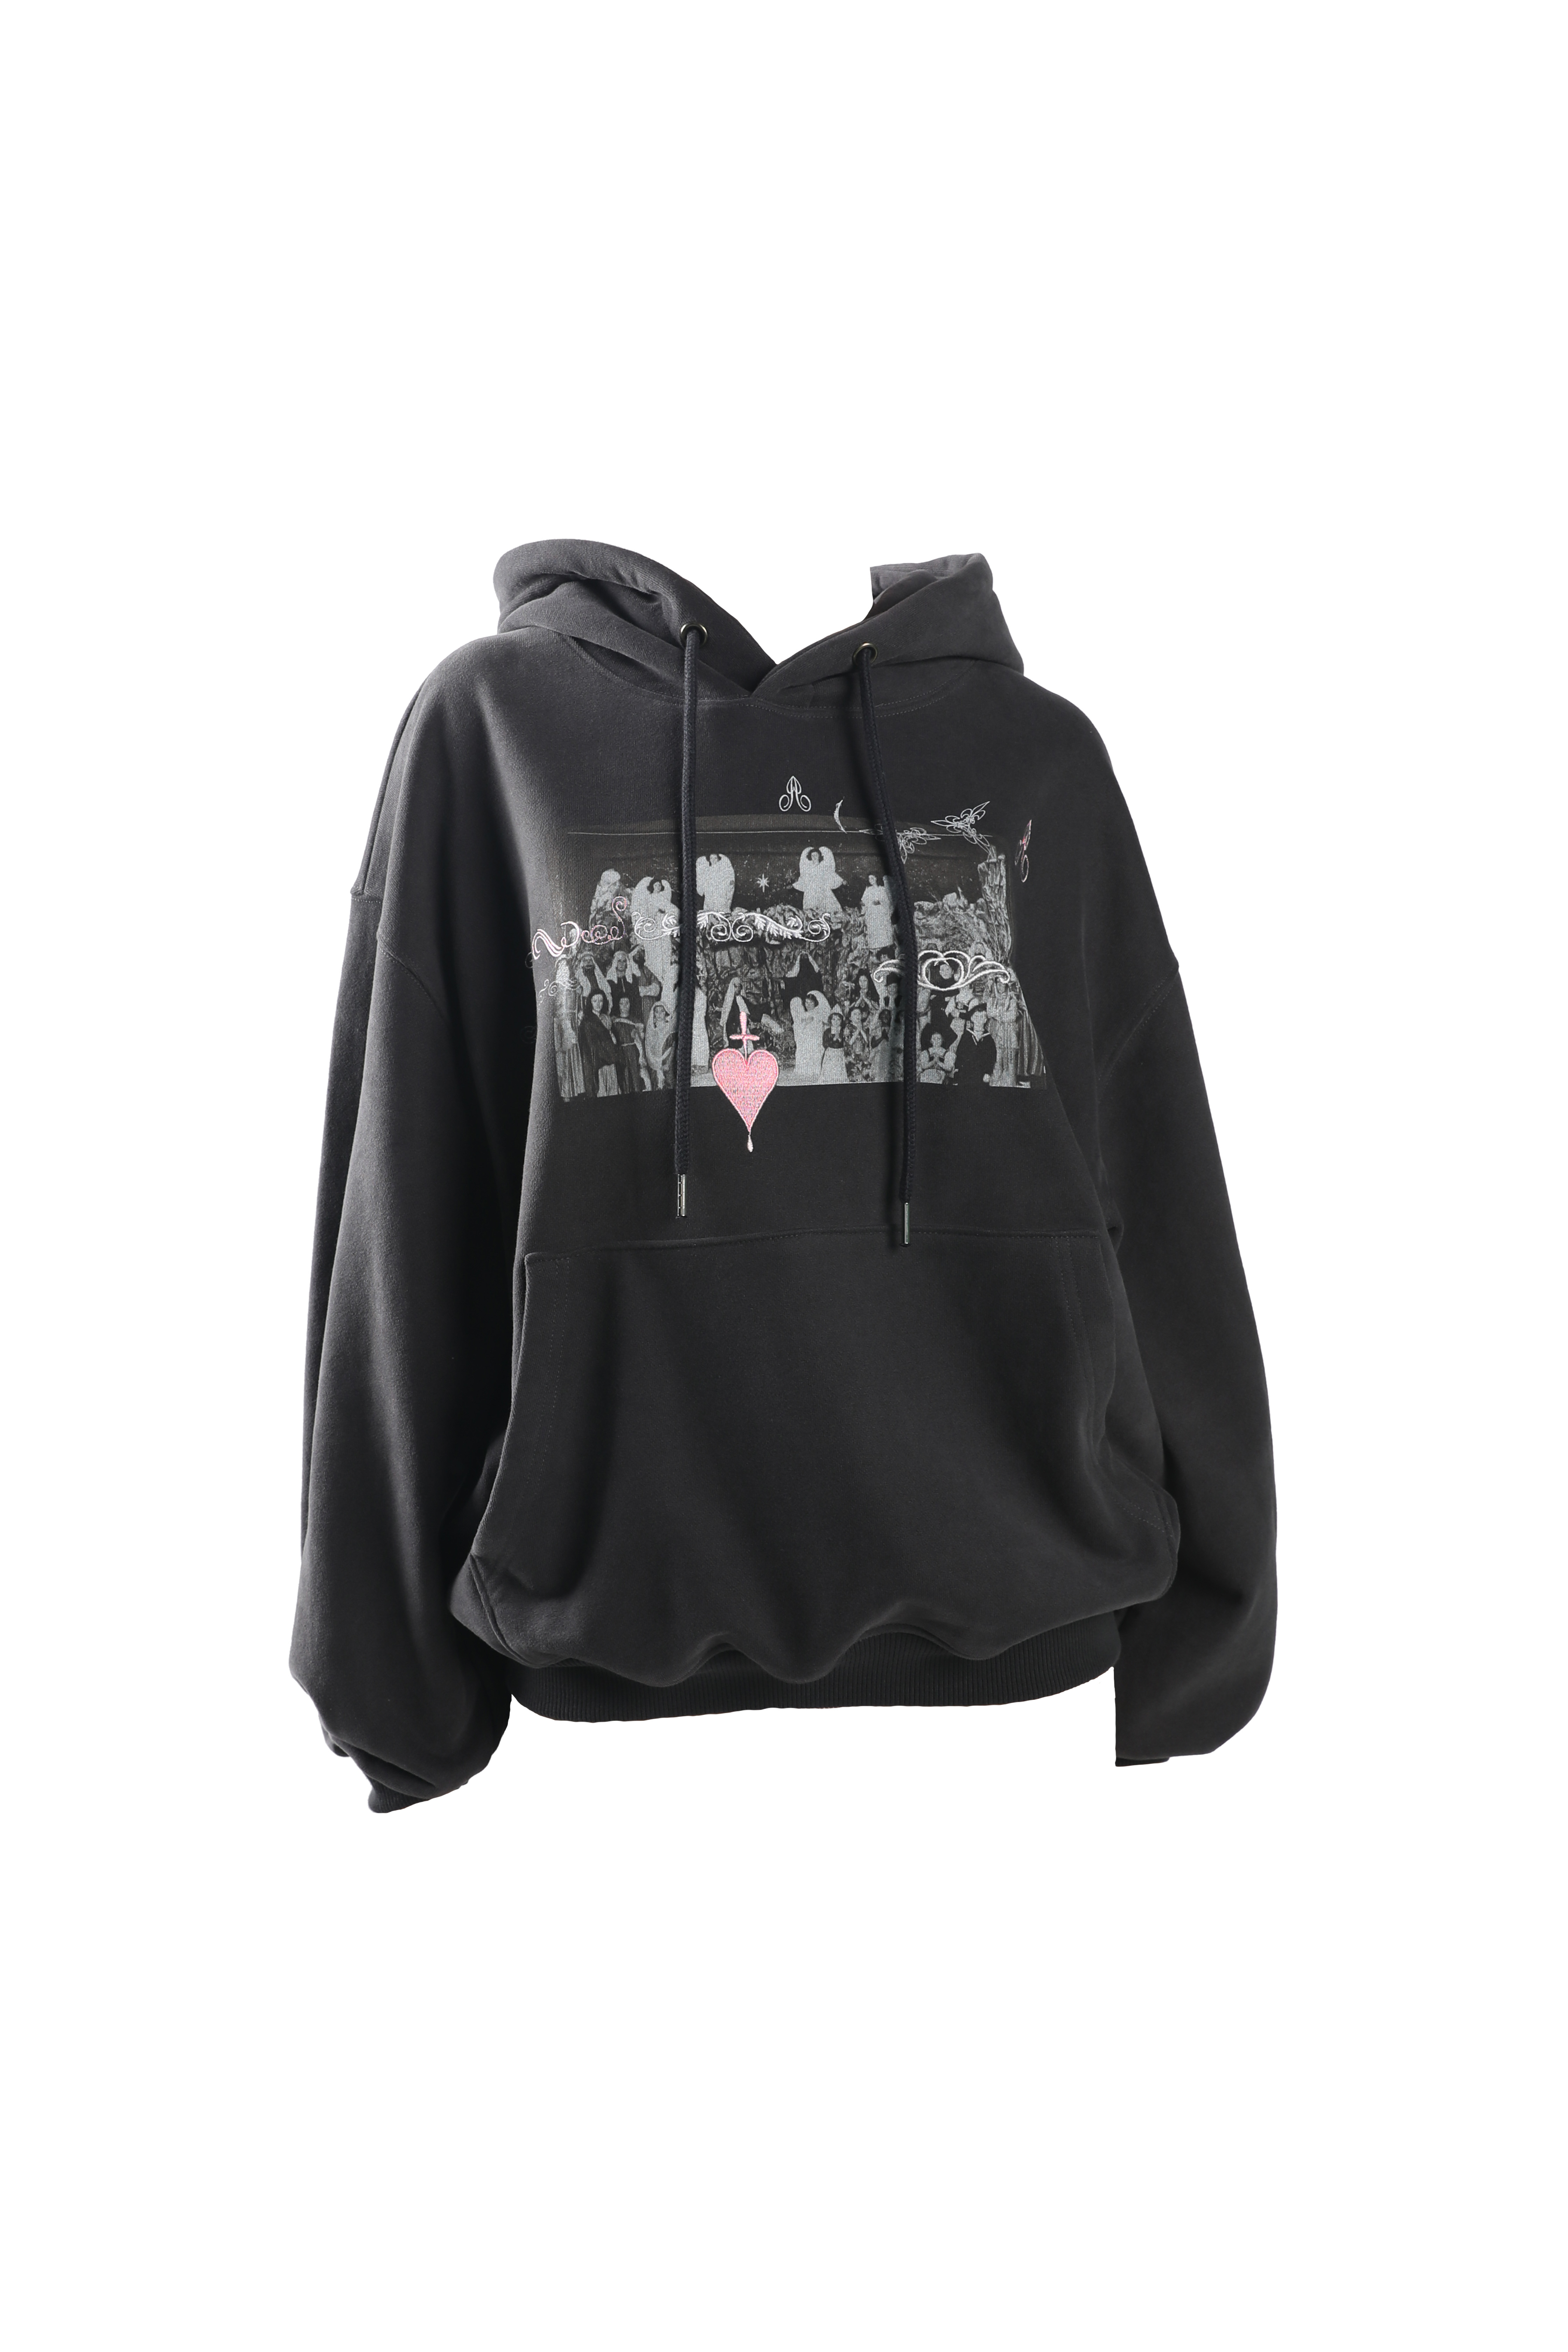 [only 4]Theater club hoodie ver.2 (charcoal)